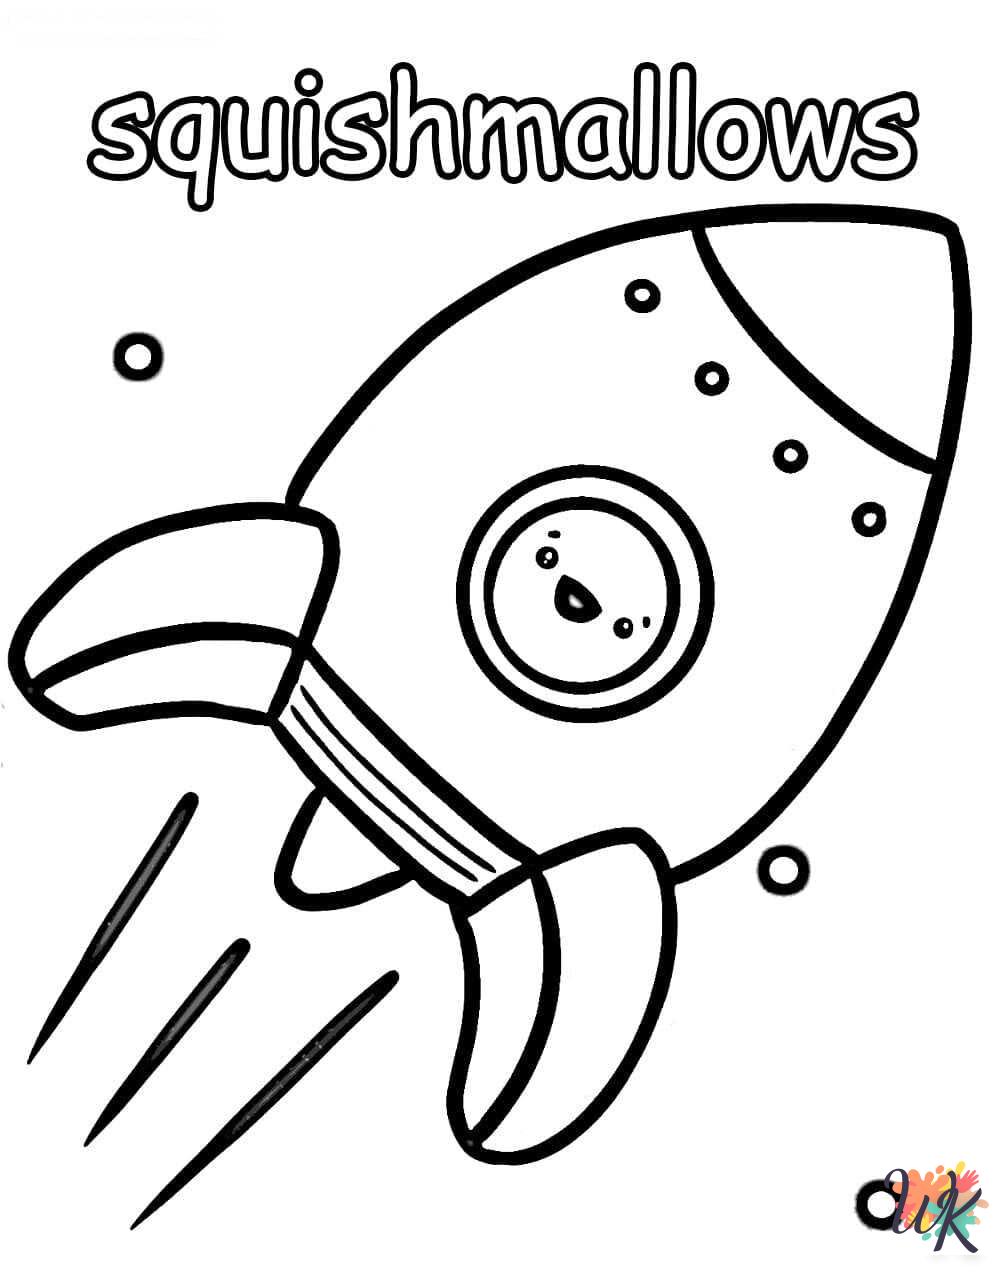 Squishmallows coloring pages pdf